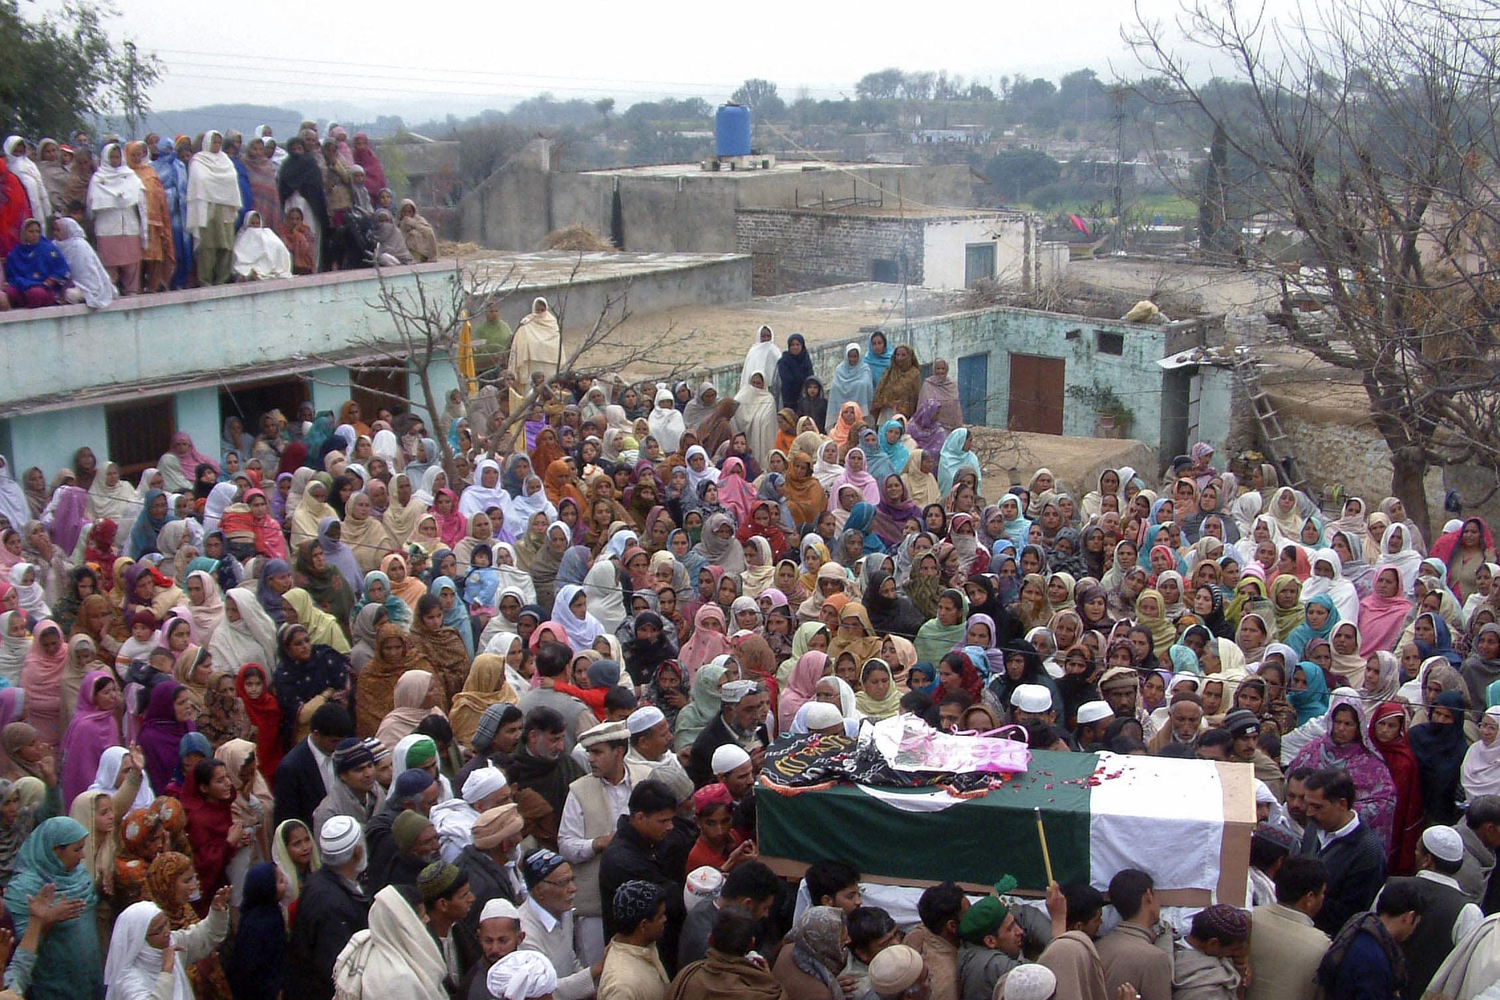 Villagers gather around the flag-draped casket of Pakistani soldier Muhammad Akhlaq, whom the Pakistan military said was killed by Indian soldiers after crossing into the Indian side of Kashmir, before funeral prayers at his village Pind Bainso